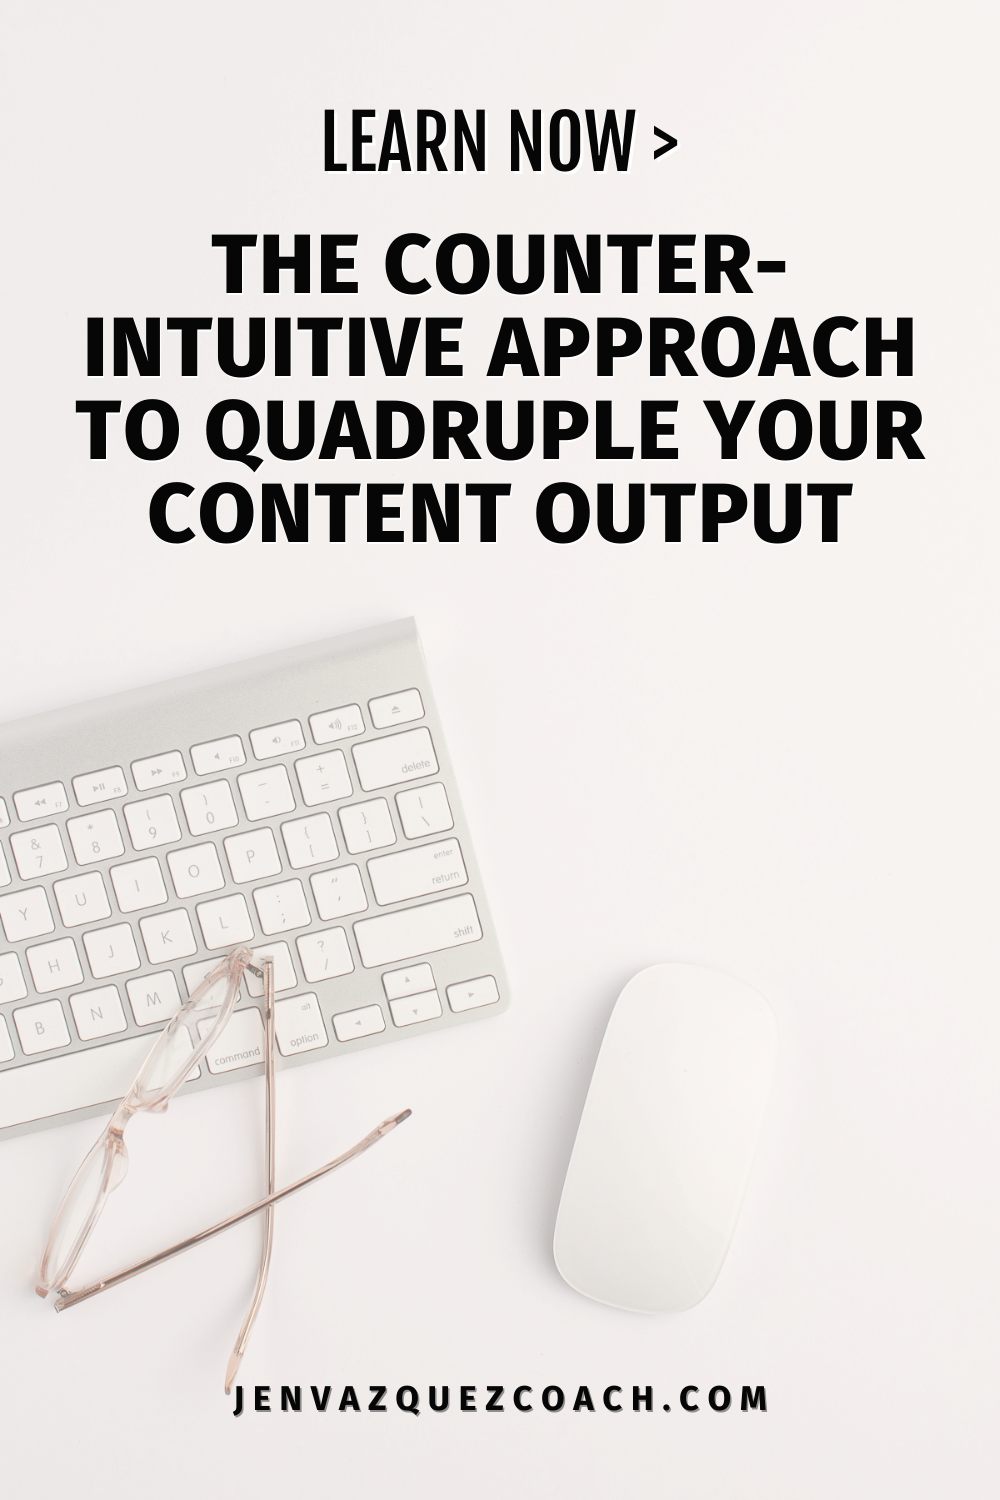 The Counter-Intuitive Approach to Quadruple Your Content Output by Jen Vazquez Media